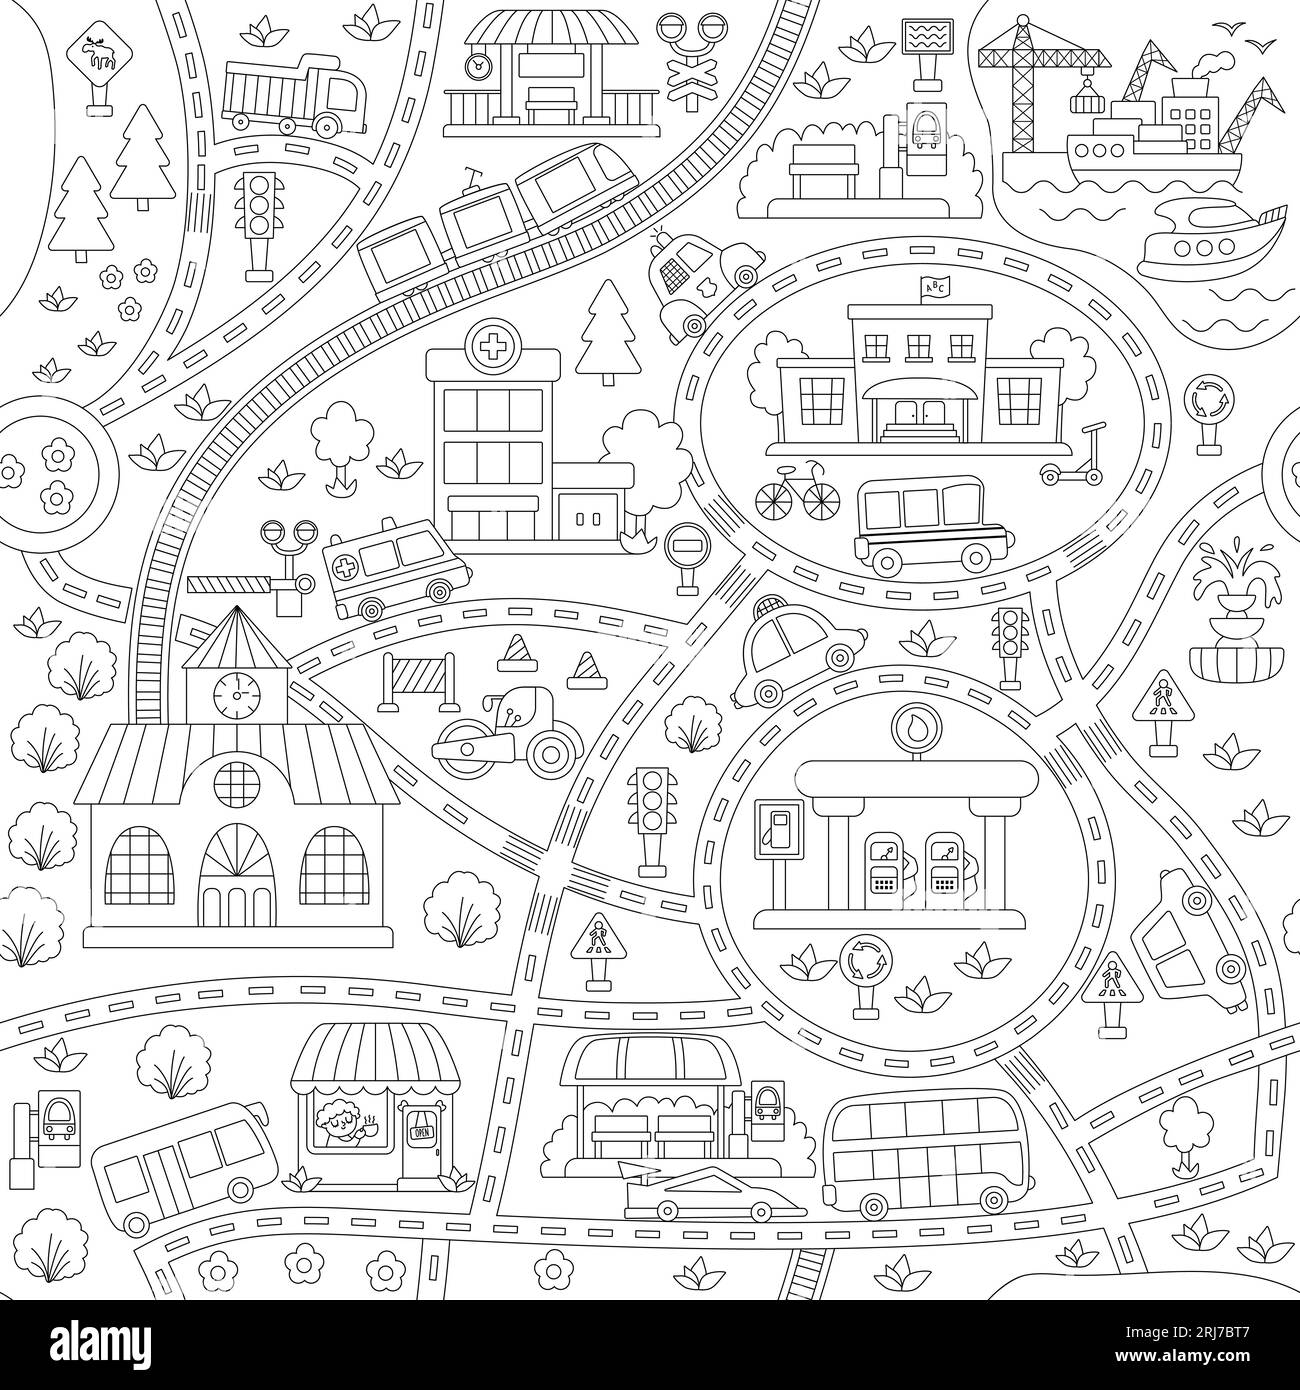 City transport black and white map seamless pattern. Repeating line ...